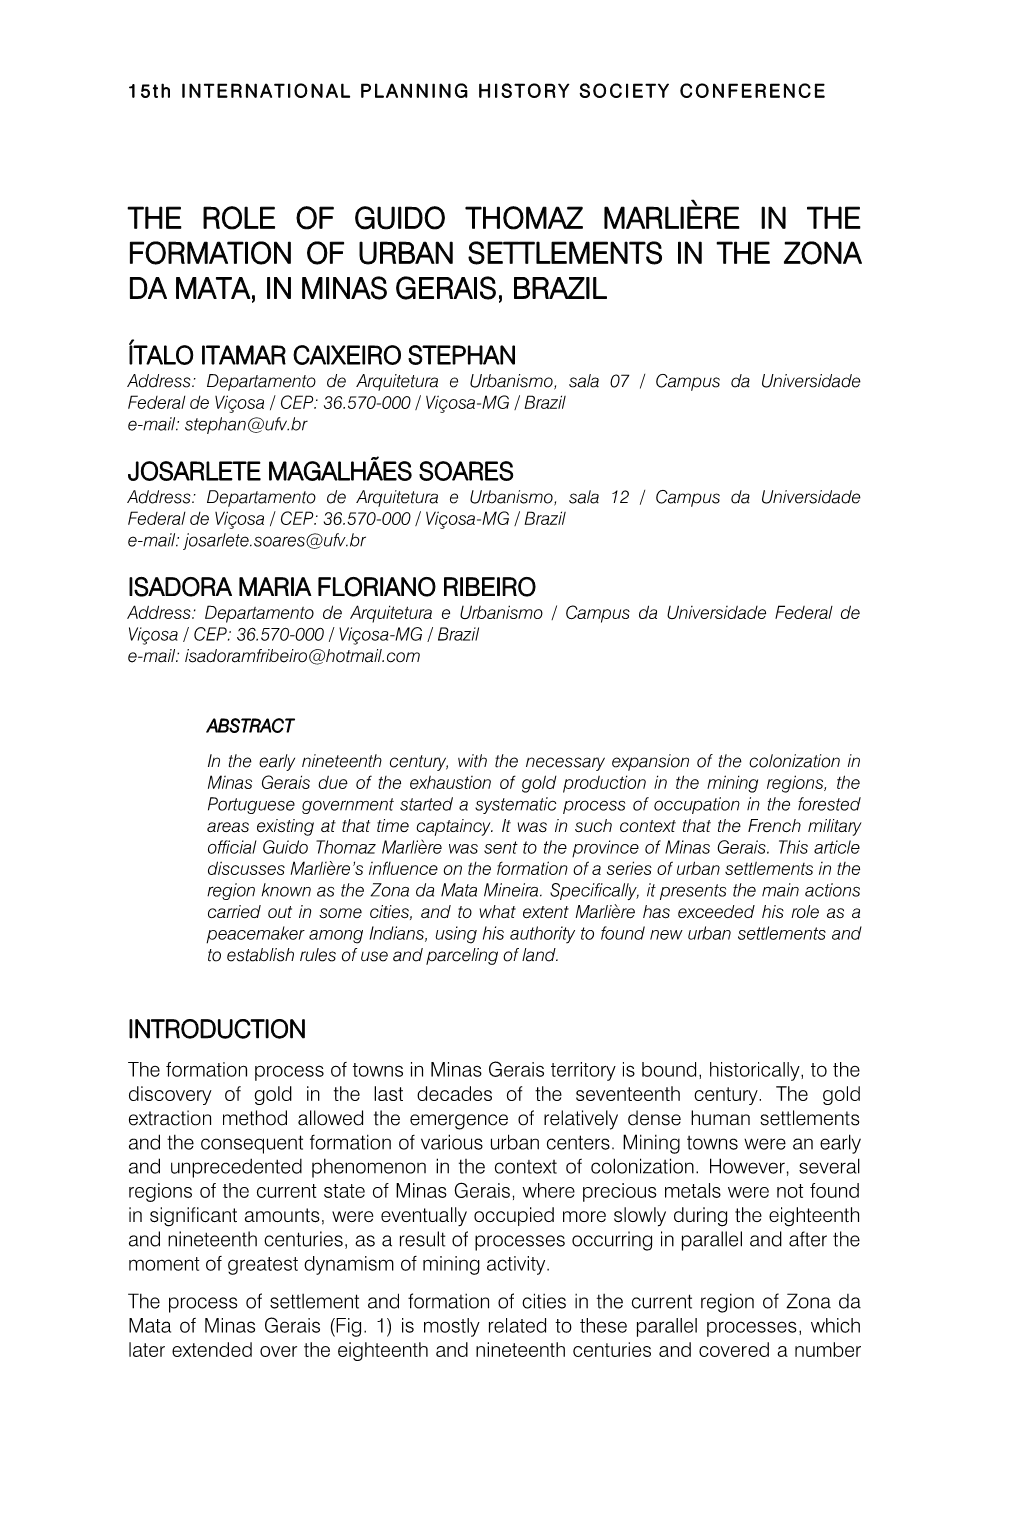 The Role of Guido Thomaz Marlière in the Formation of Urban Settlements in the Zona Da Mata, in Minas Gerais, Brazil